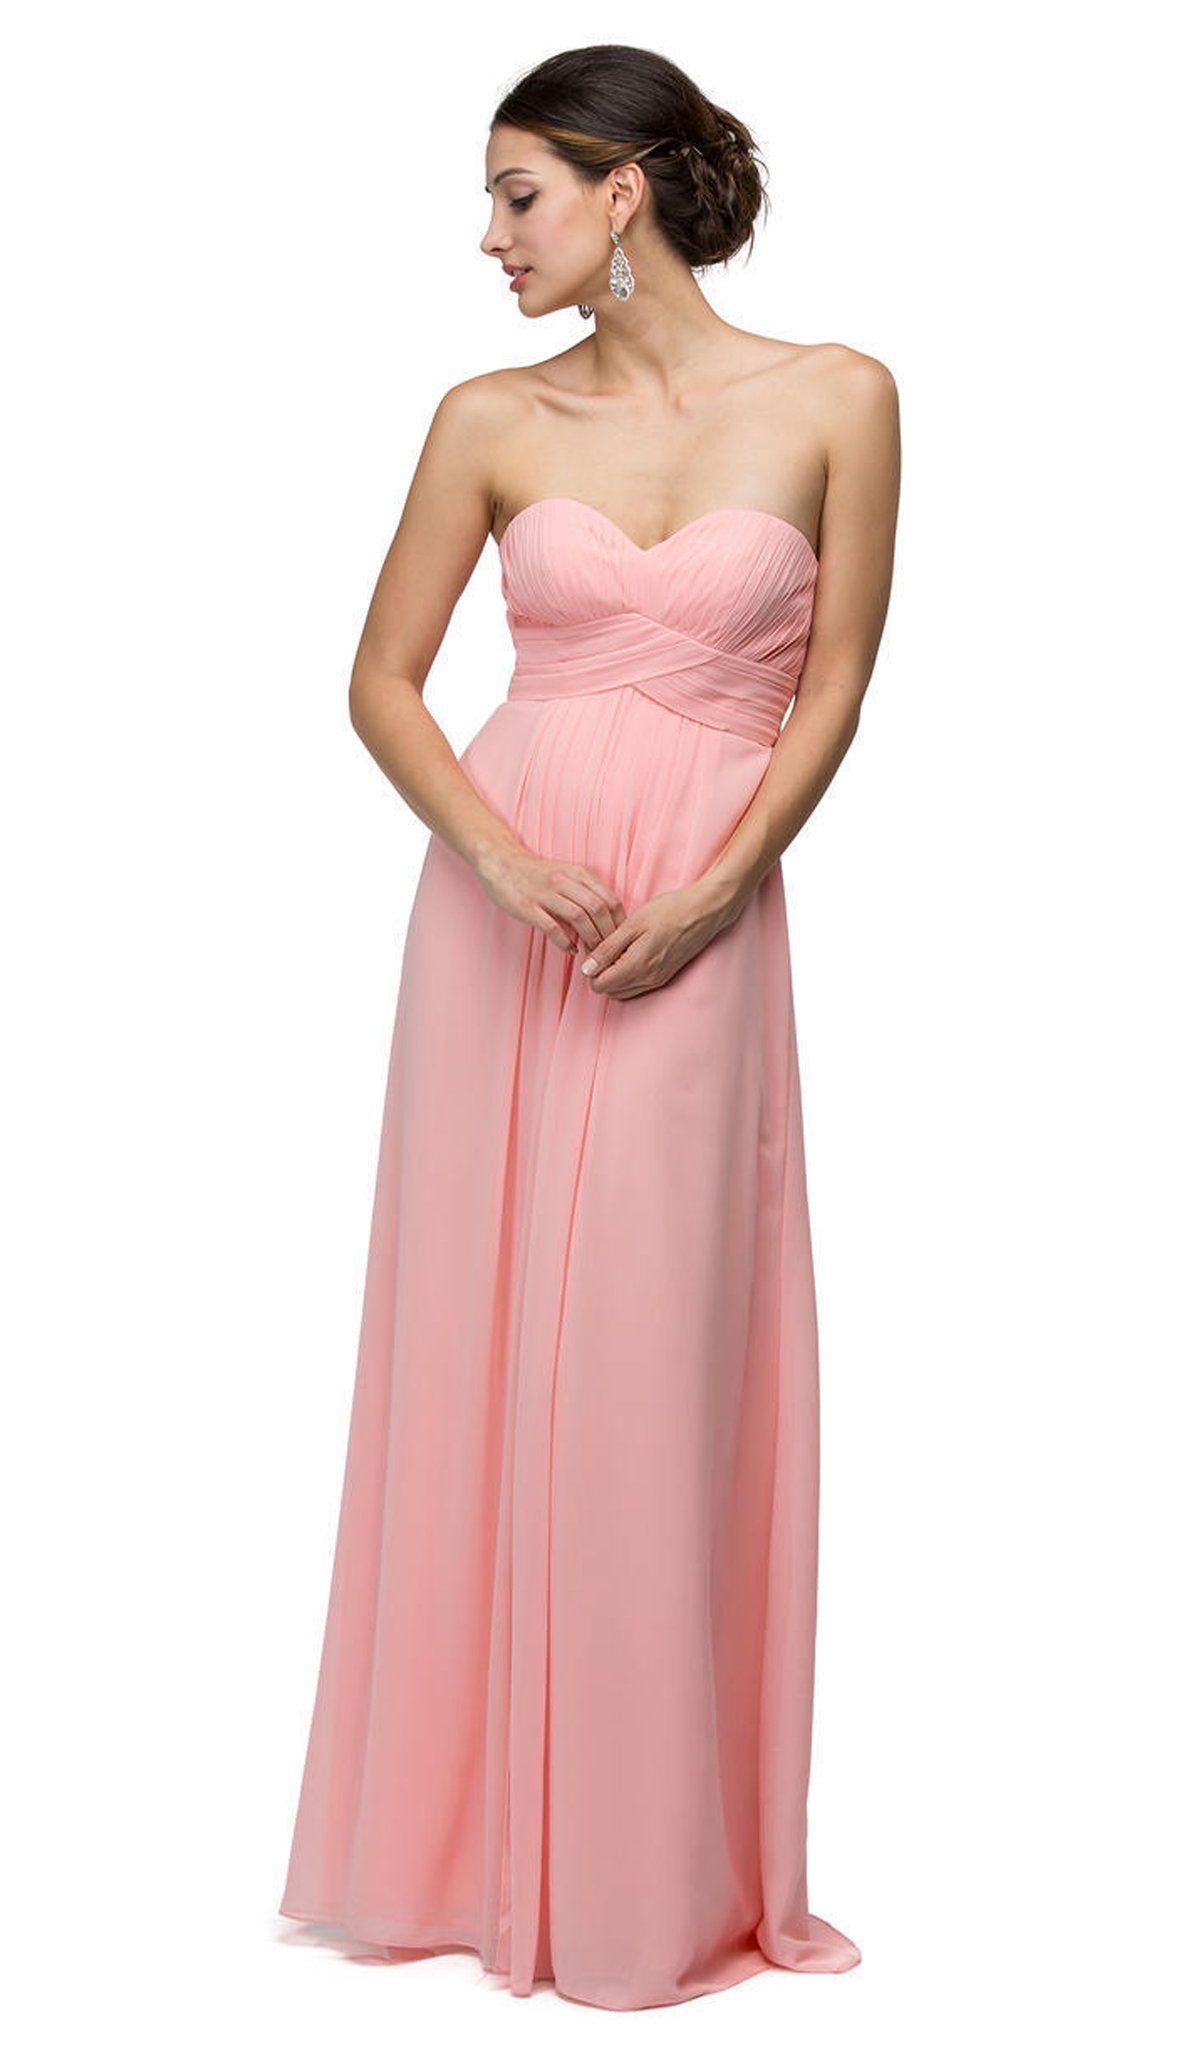 Dancing Queen - 8658 Strapless Chiffon Empire Long Prom Dress Special Occasion Dress